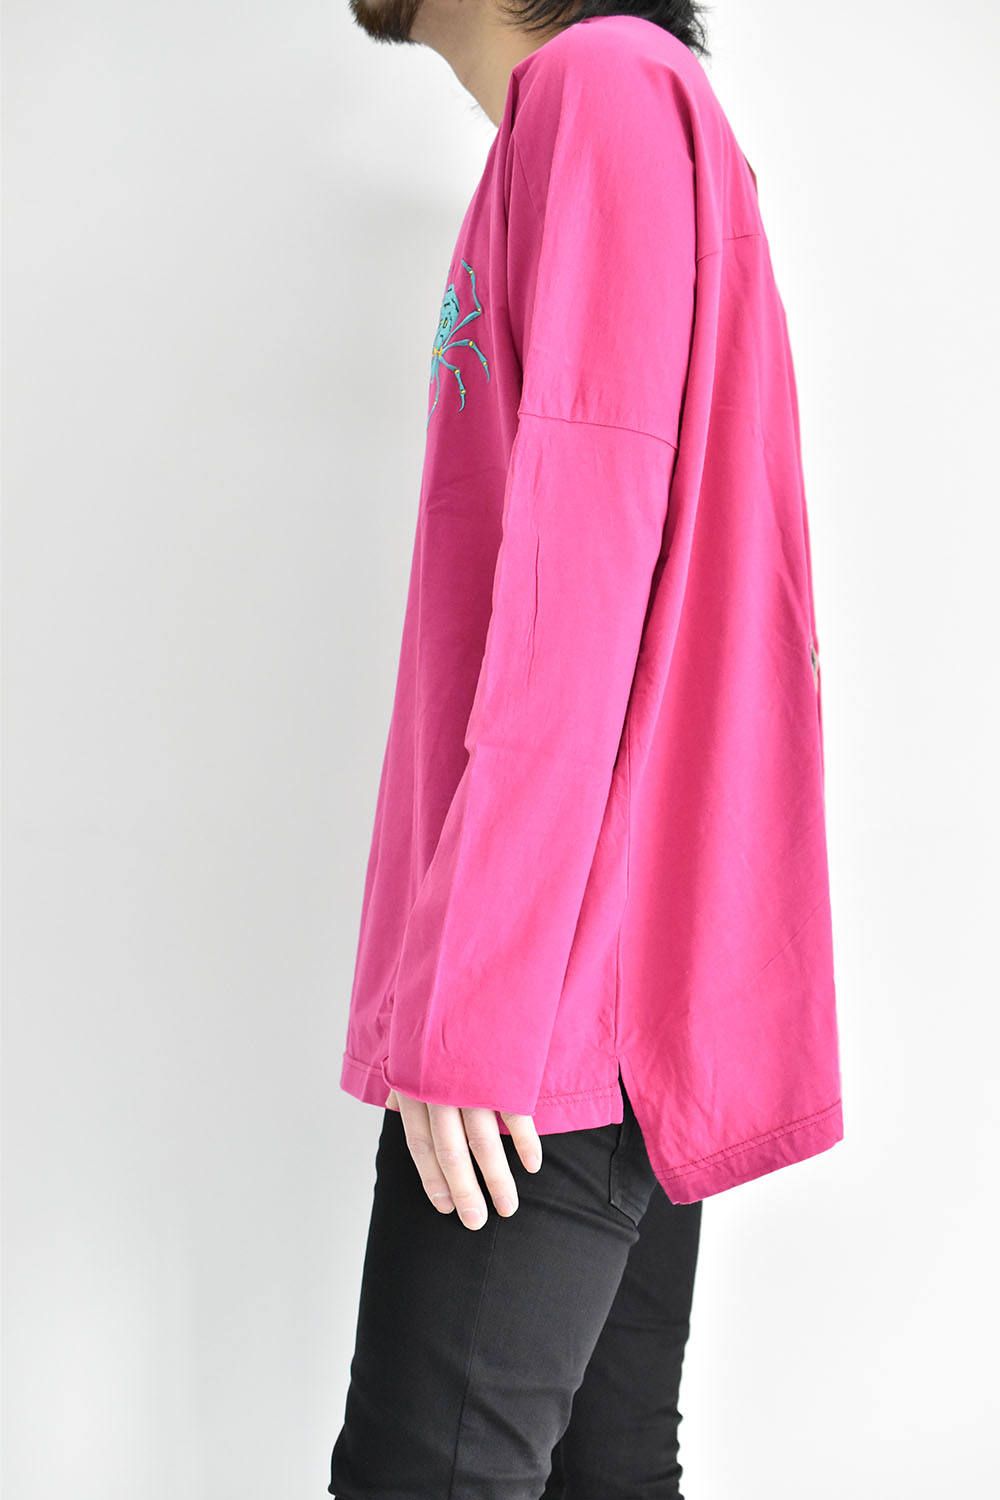 Dolman L/S"embroidery" Magenta